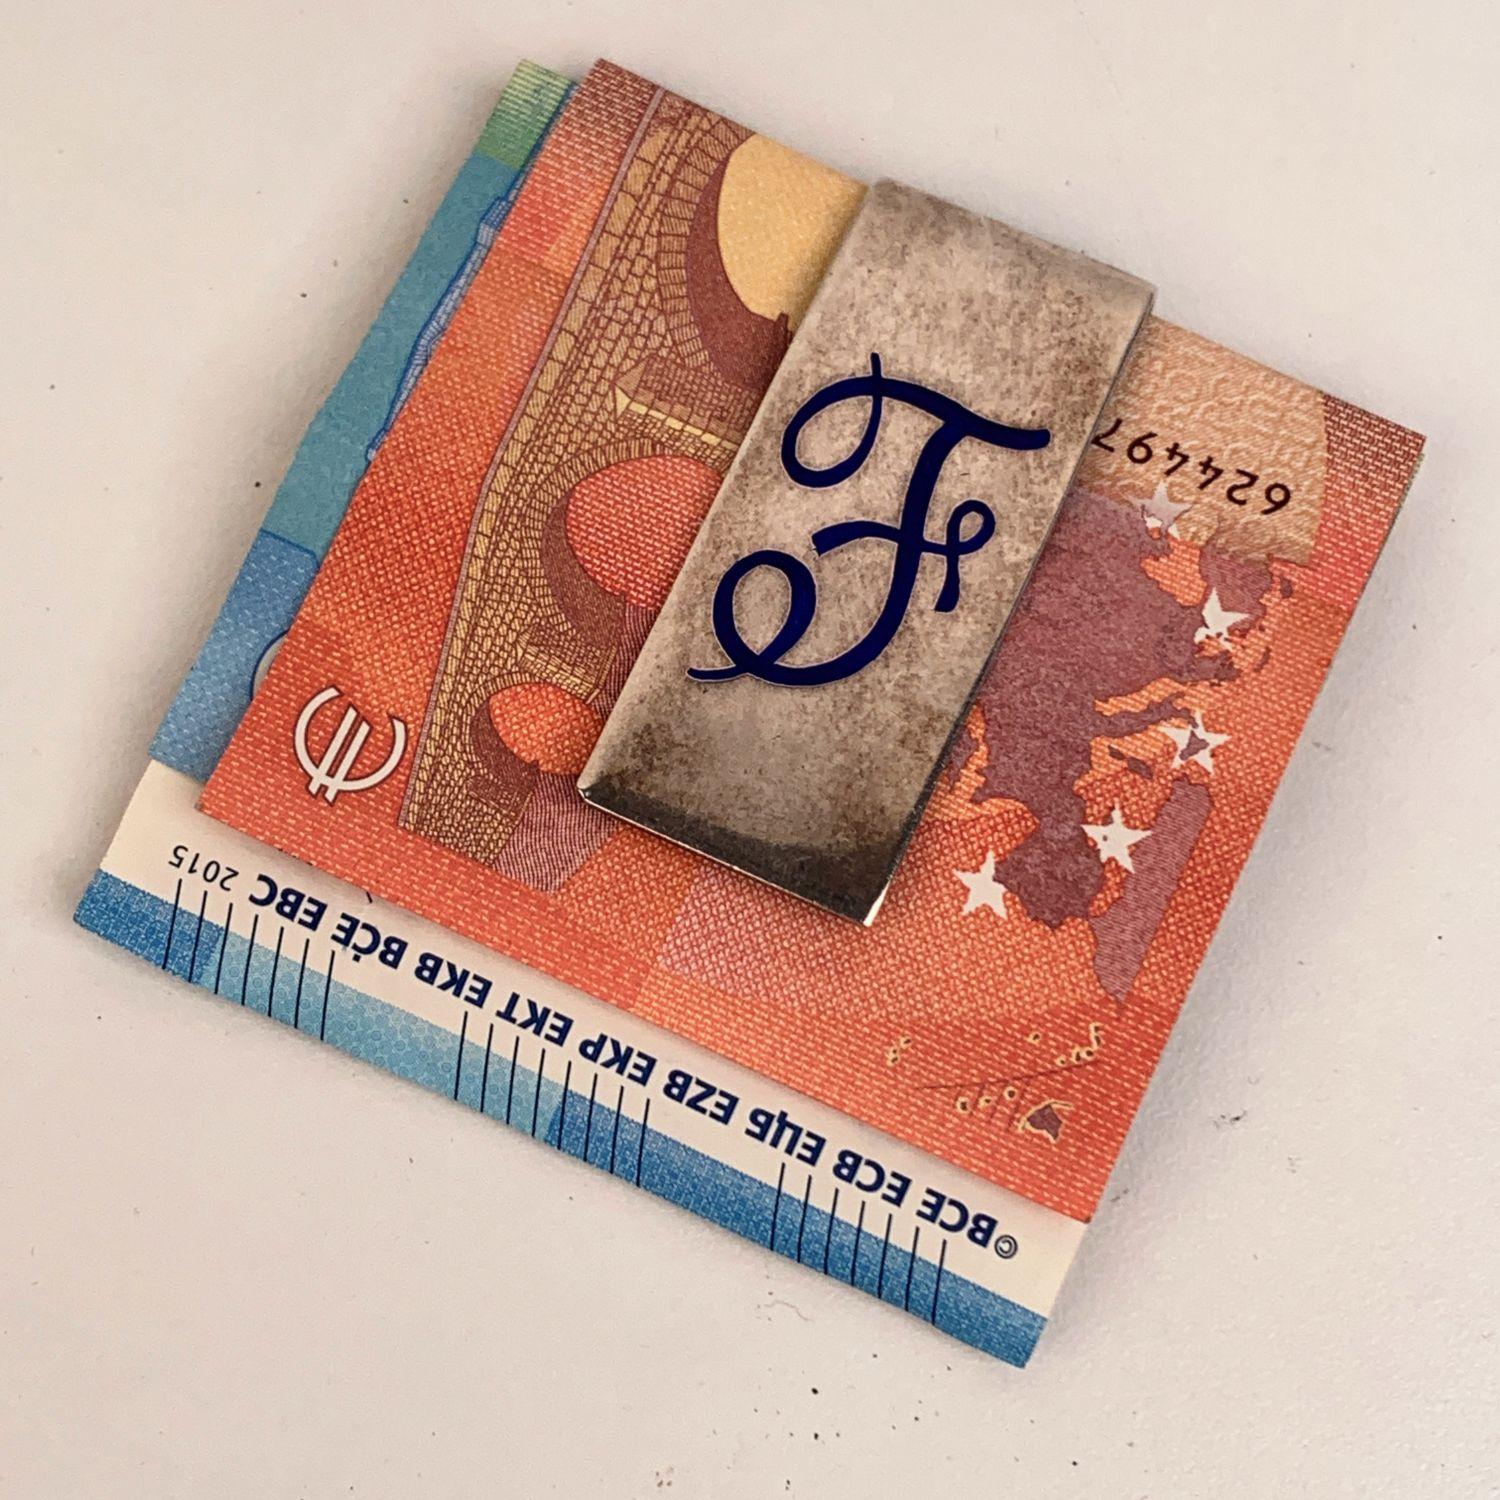 Vintage Giorgio Gucci money clip with enameled F letter in blue on the front. In sterling silver (marked '925'). Height: 2.25 inches - 5,7 cm - Width: 0.8 inch - 2,7 cm

Details

MATERIAL: Sterling Silver

COLOR: Silver

MODEL: -

GENDER: Unisex